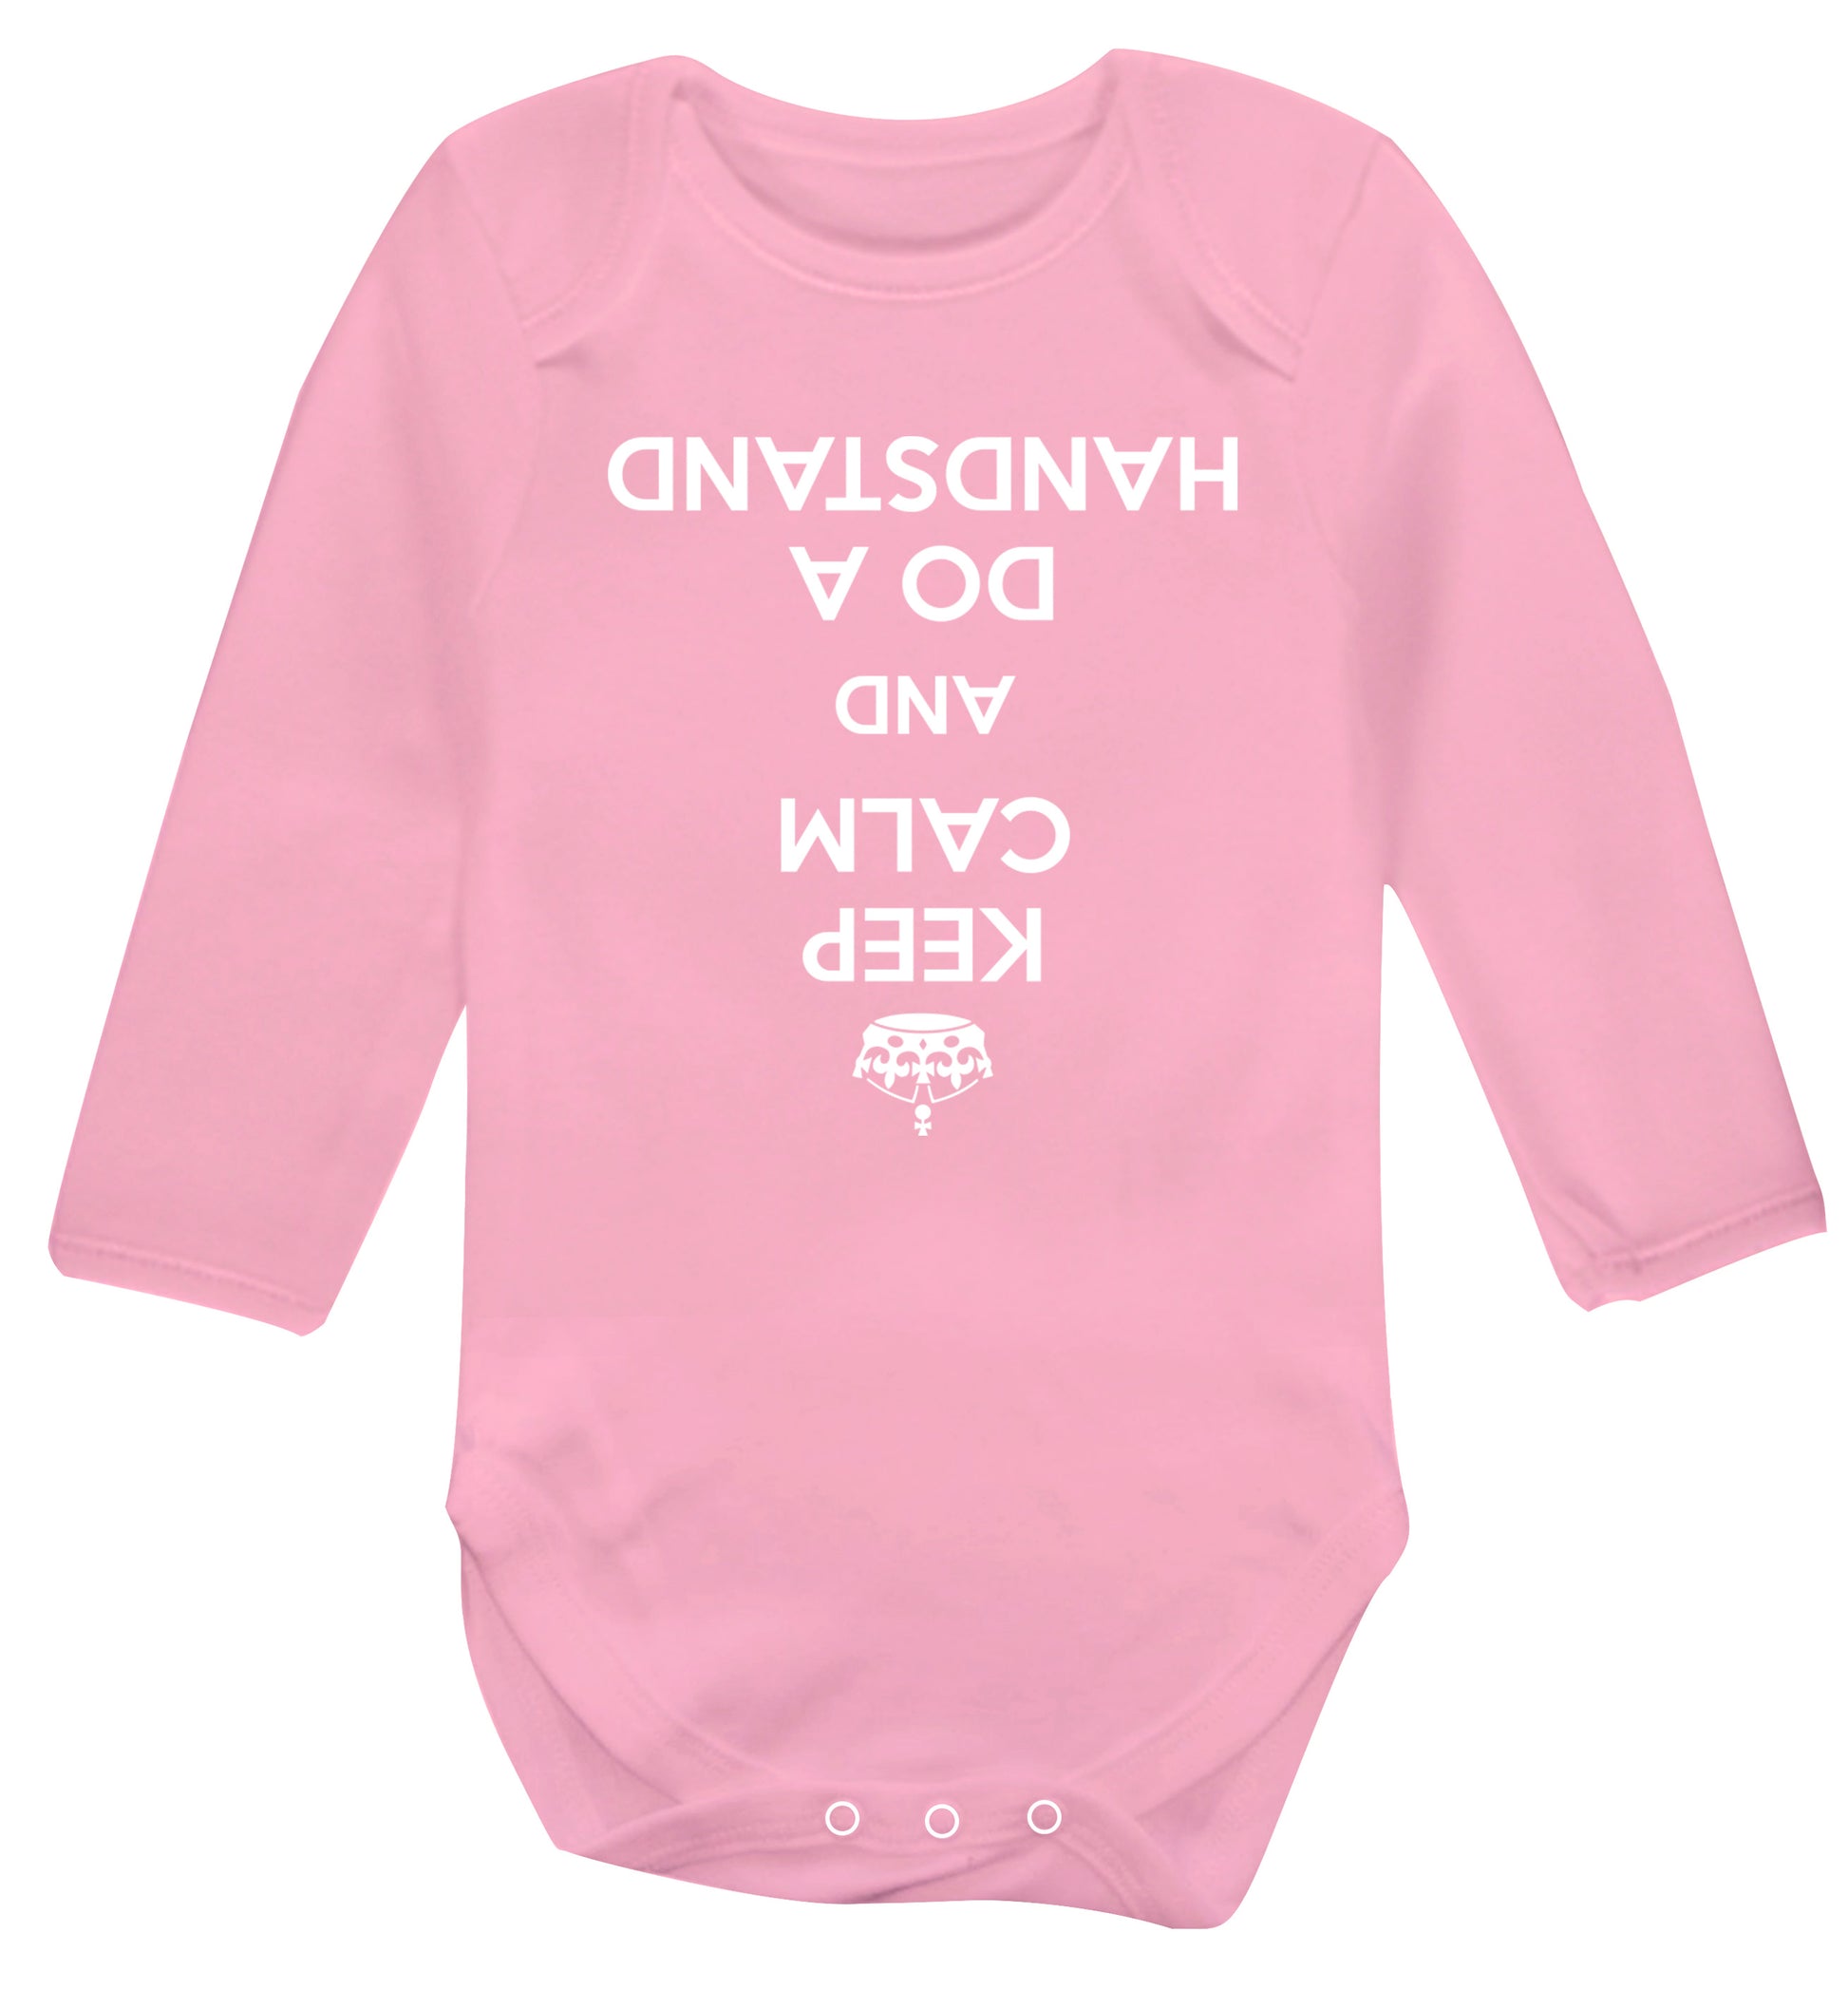 Keep calm and do a handstand Baby Vest long sleeved pale pink 6-12 months